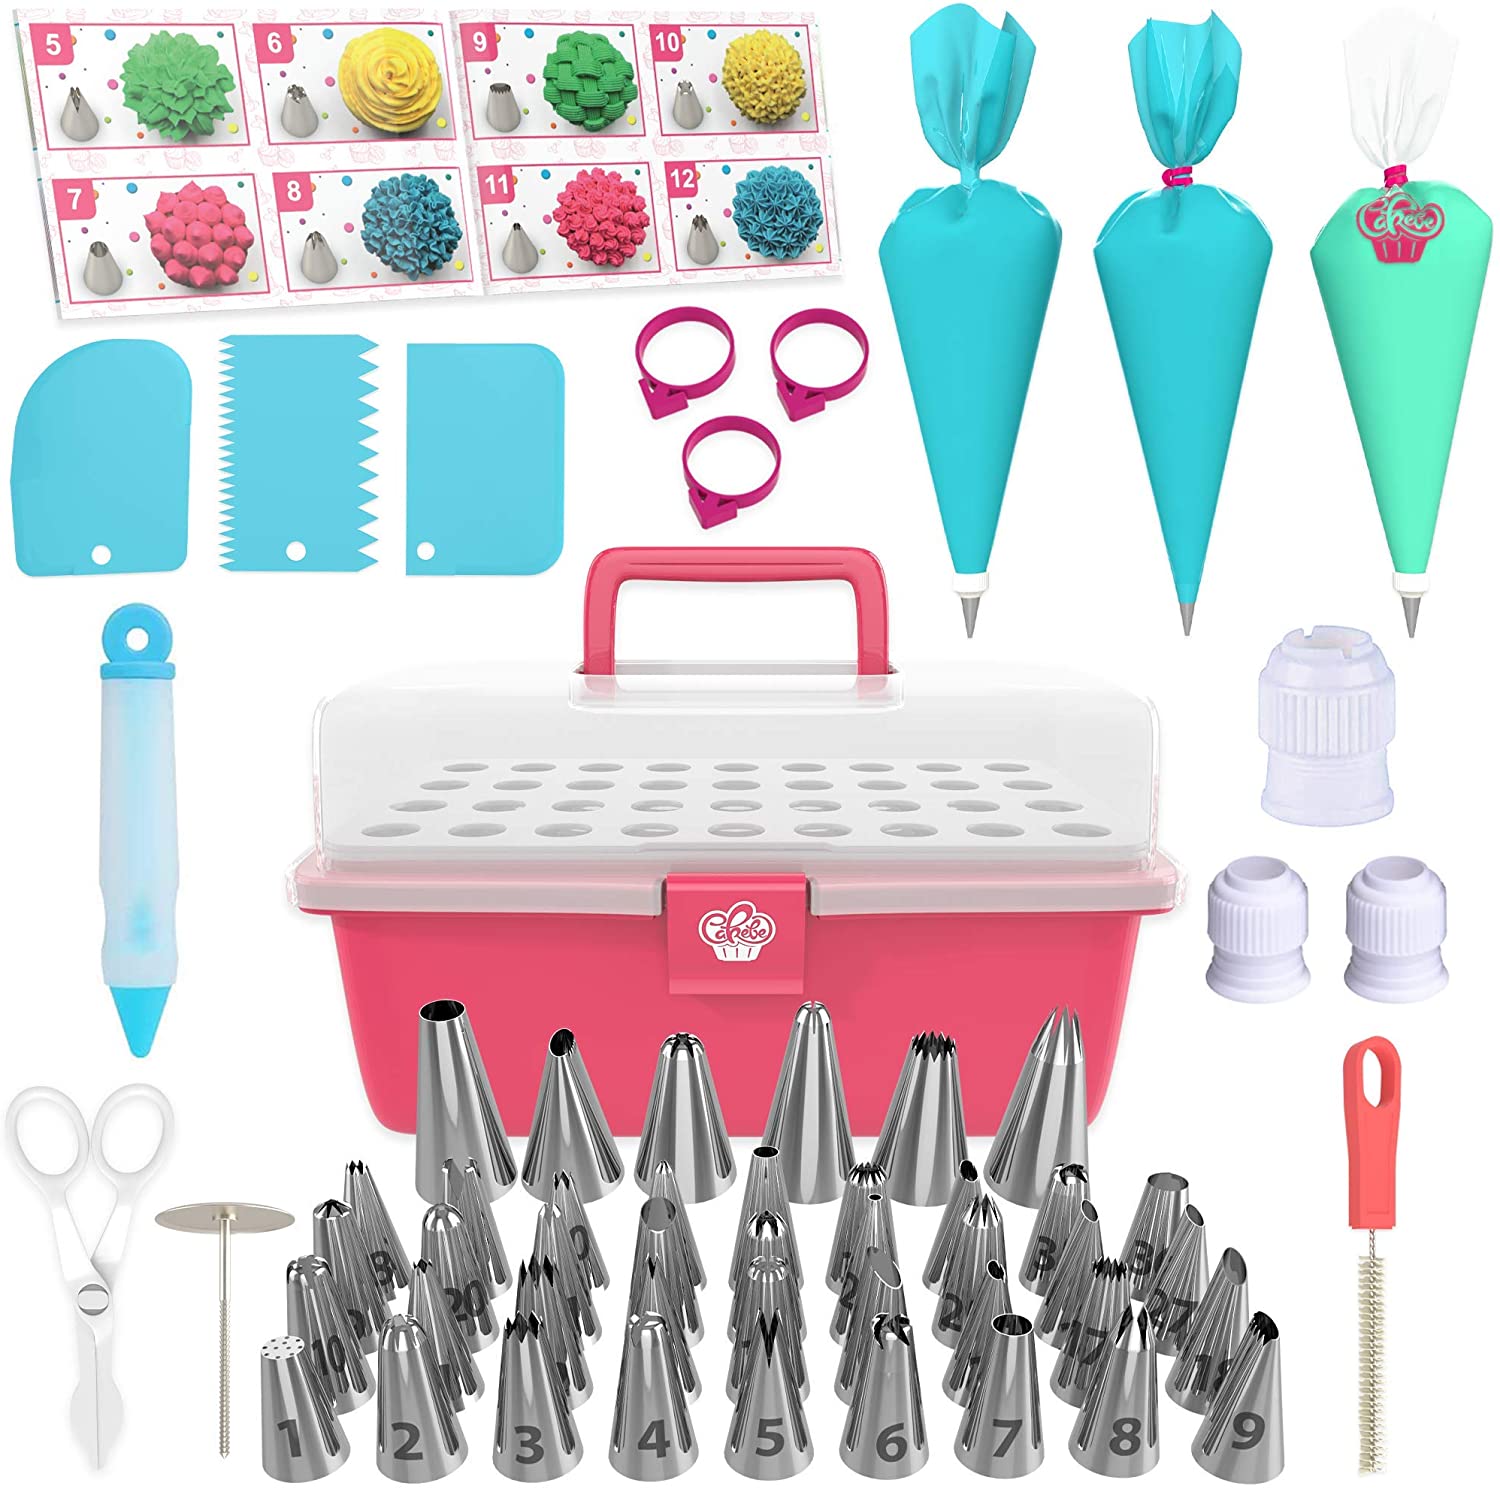 Cakebe Icing Piping Set Cookie Decorating Kit, 68-Piece